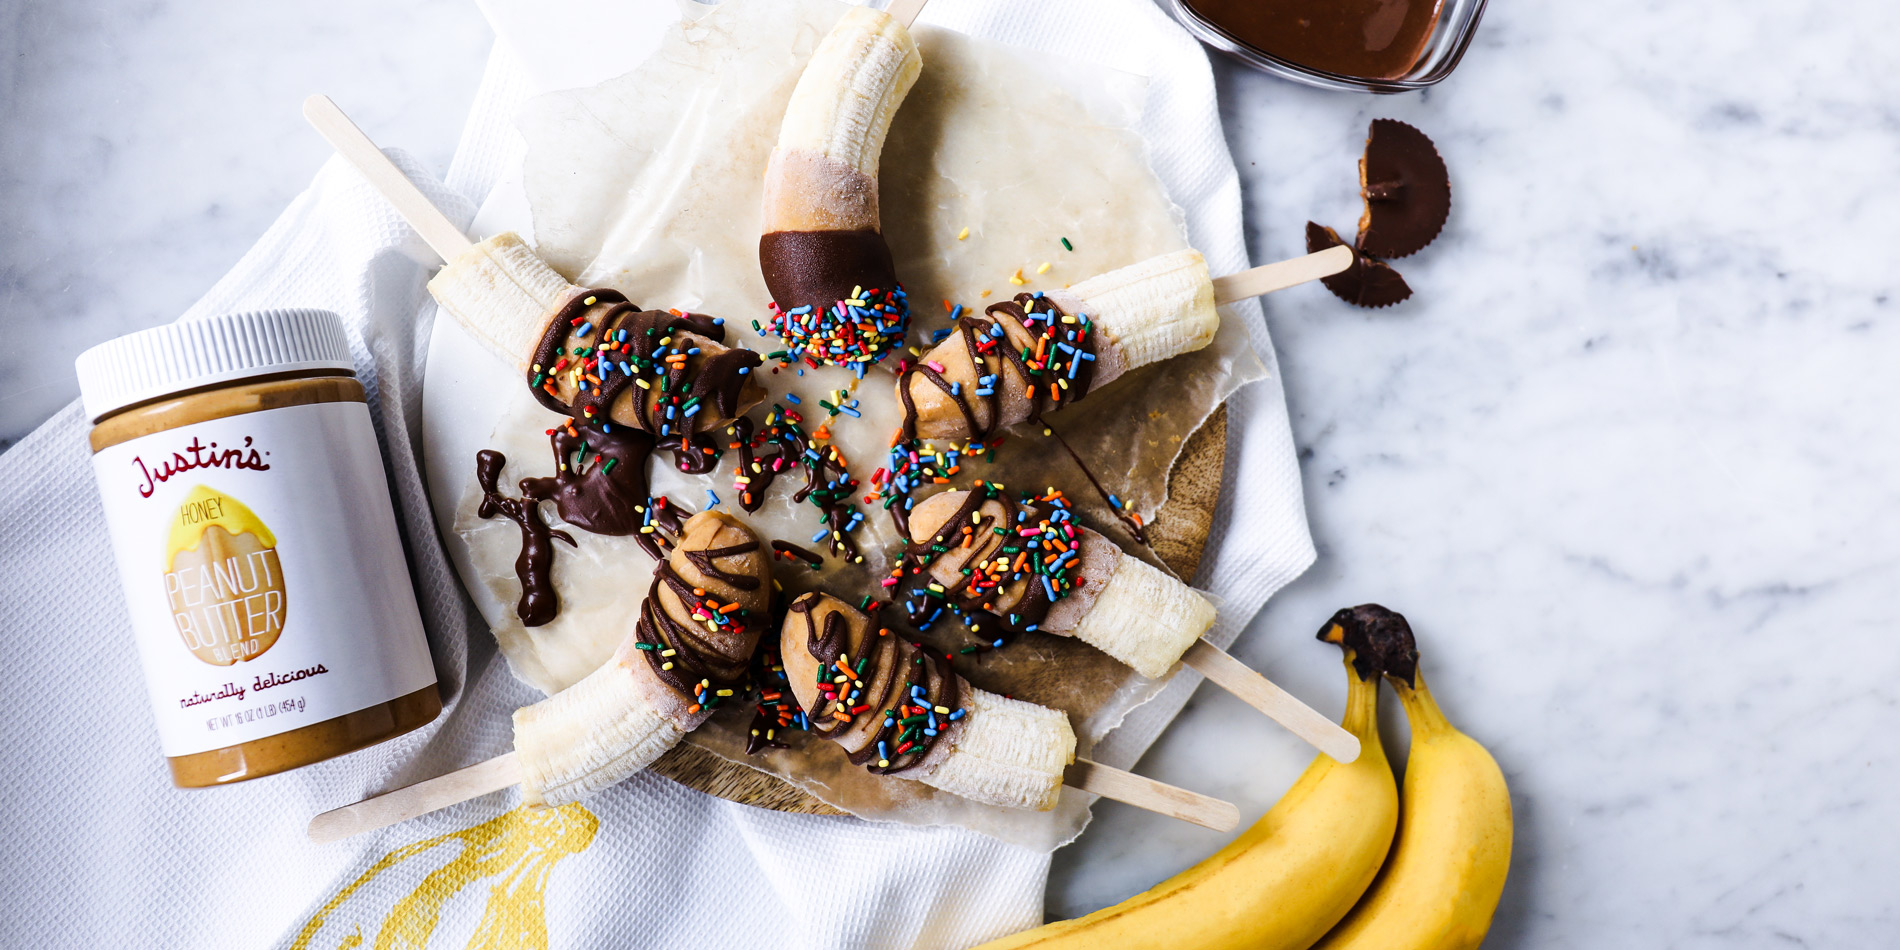 Frozen Chocolate PB Banana Pops with chocolate drizzle, rainbow sprinkles, Justin's honey peanut butter jar and two bananas